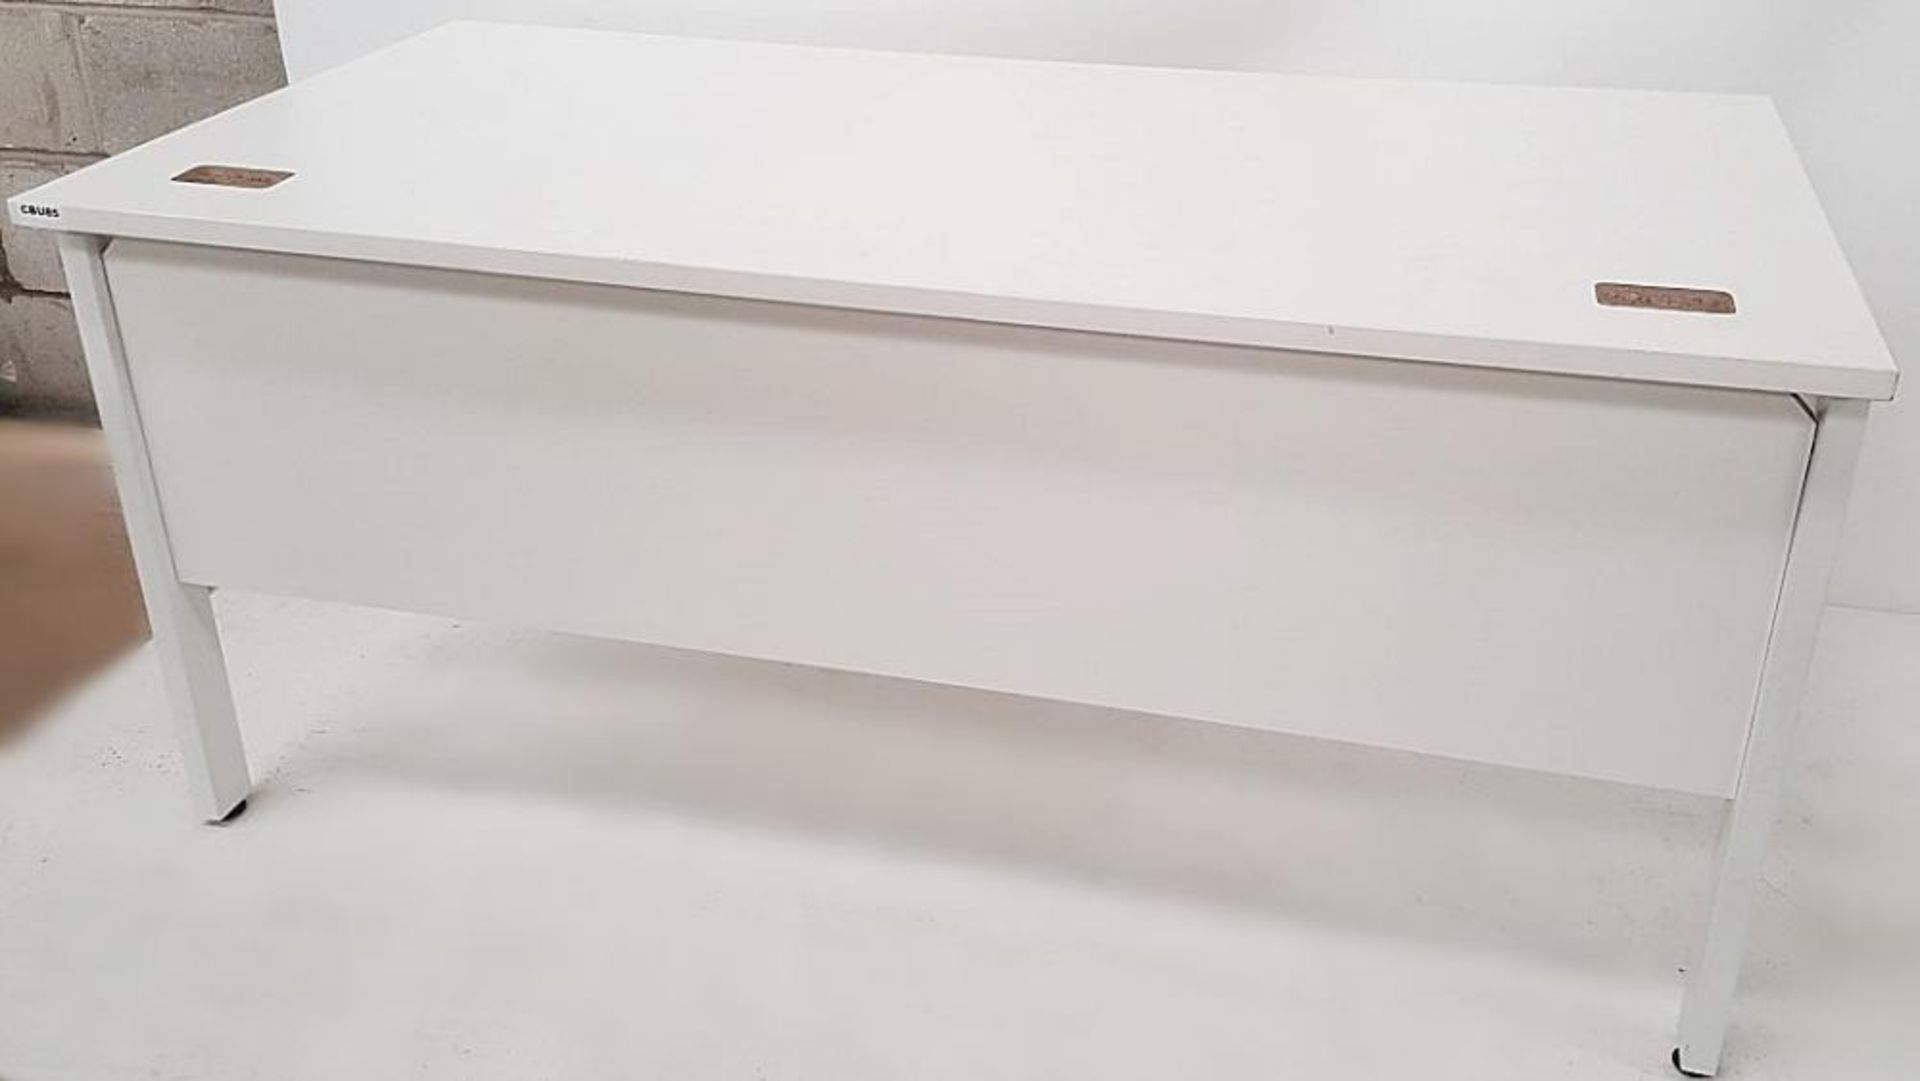 1 x Large Premium Office Desk In White - Used, In Good Condition - Dimensions: W160 x W80 x H74cm - - Image 5 of 5